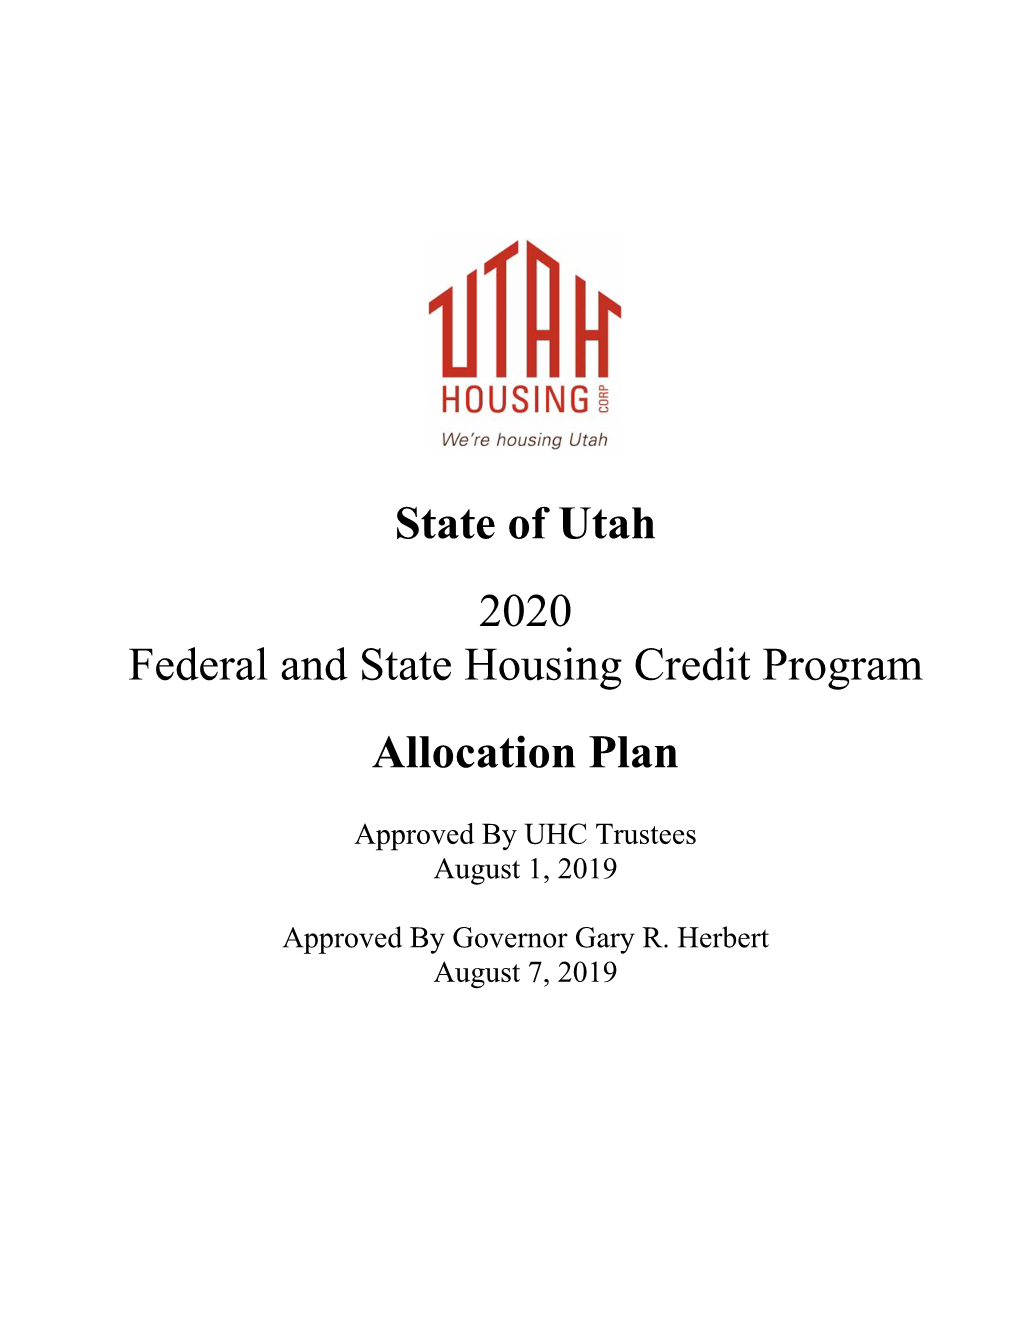 State of Utah 2020 Federal and State Housing Credit Program Allocation